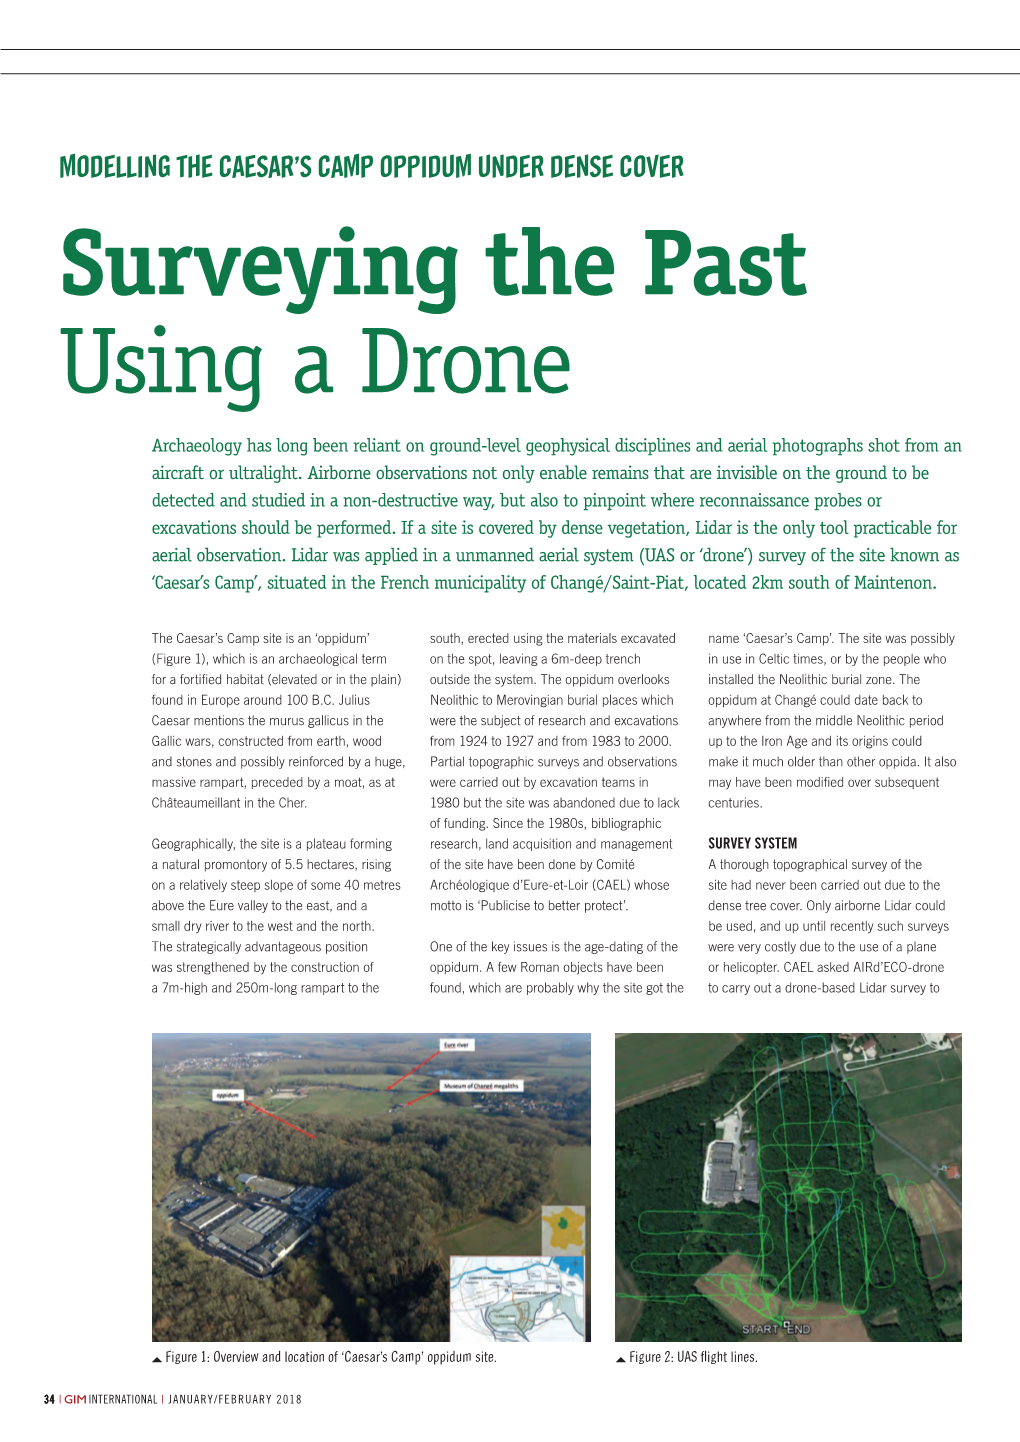 Surveying the Past Using a Drone